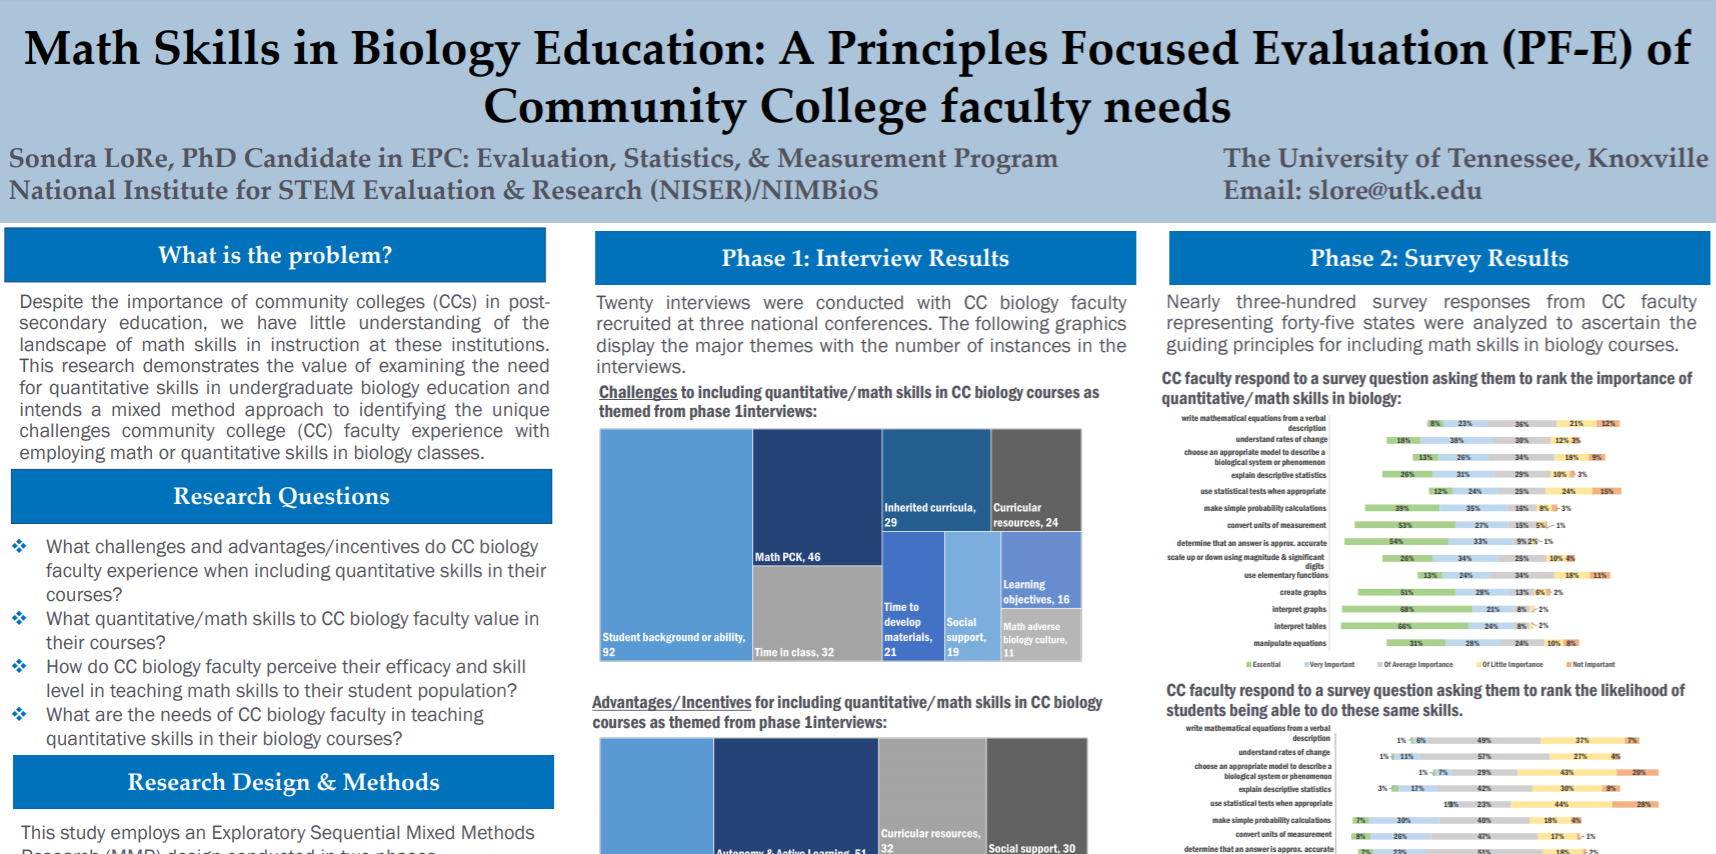 Math Skills in Biology Education: A Principles Focused Evaluation (PF-E) of Community College Faculty Needs